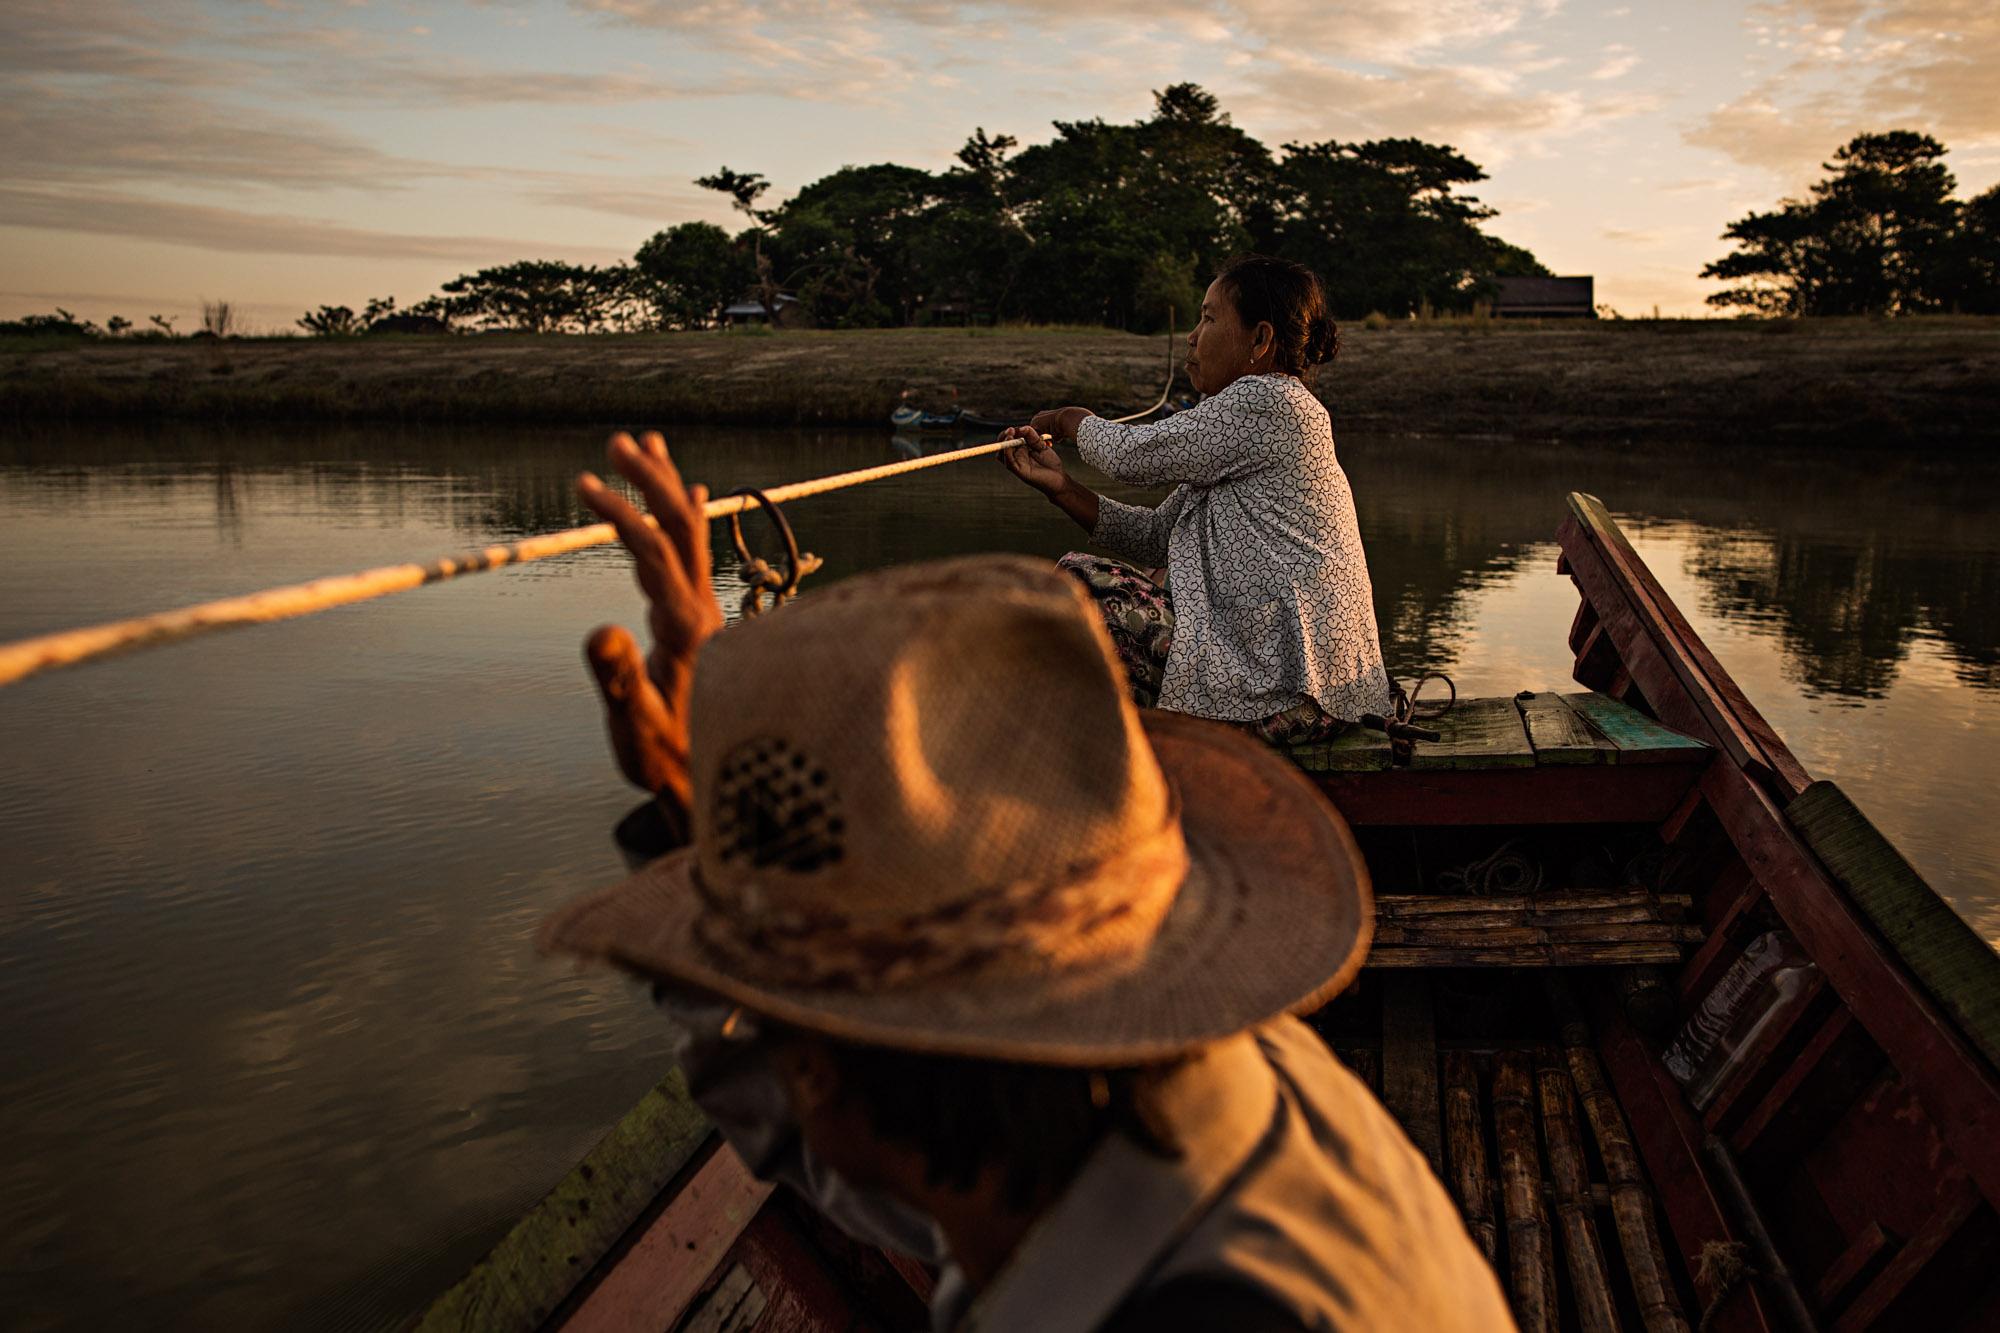 Travel - A woman operates a boat carrying passengers across a...